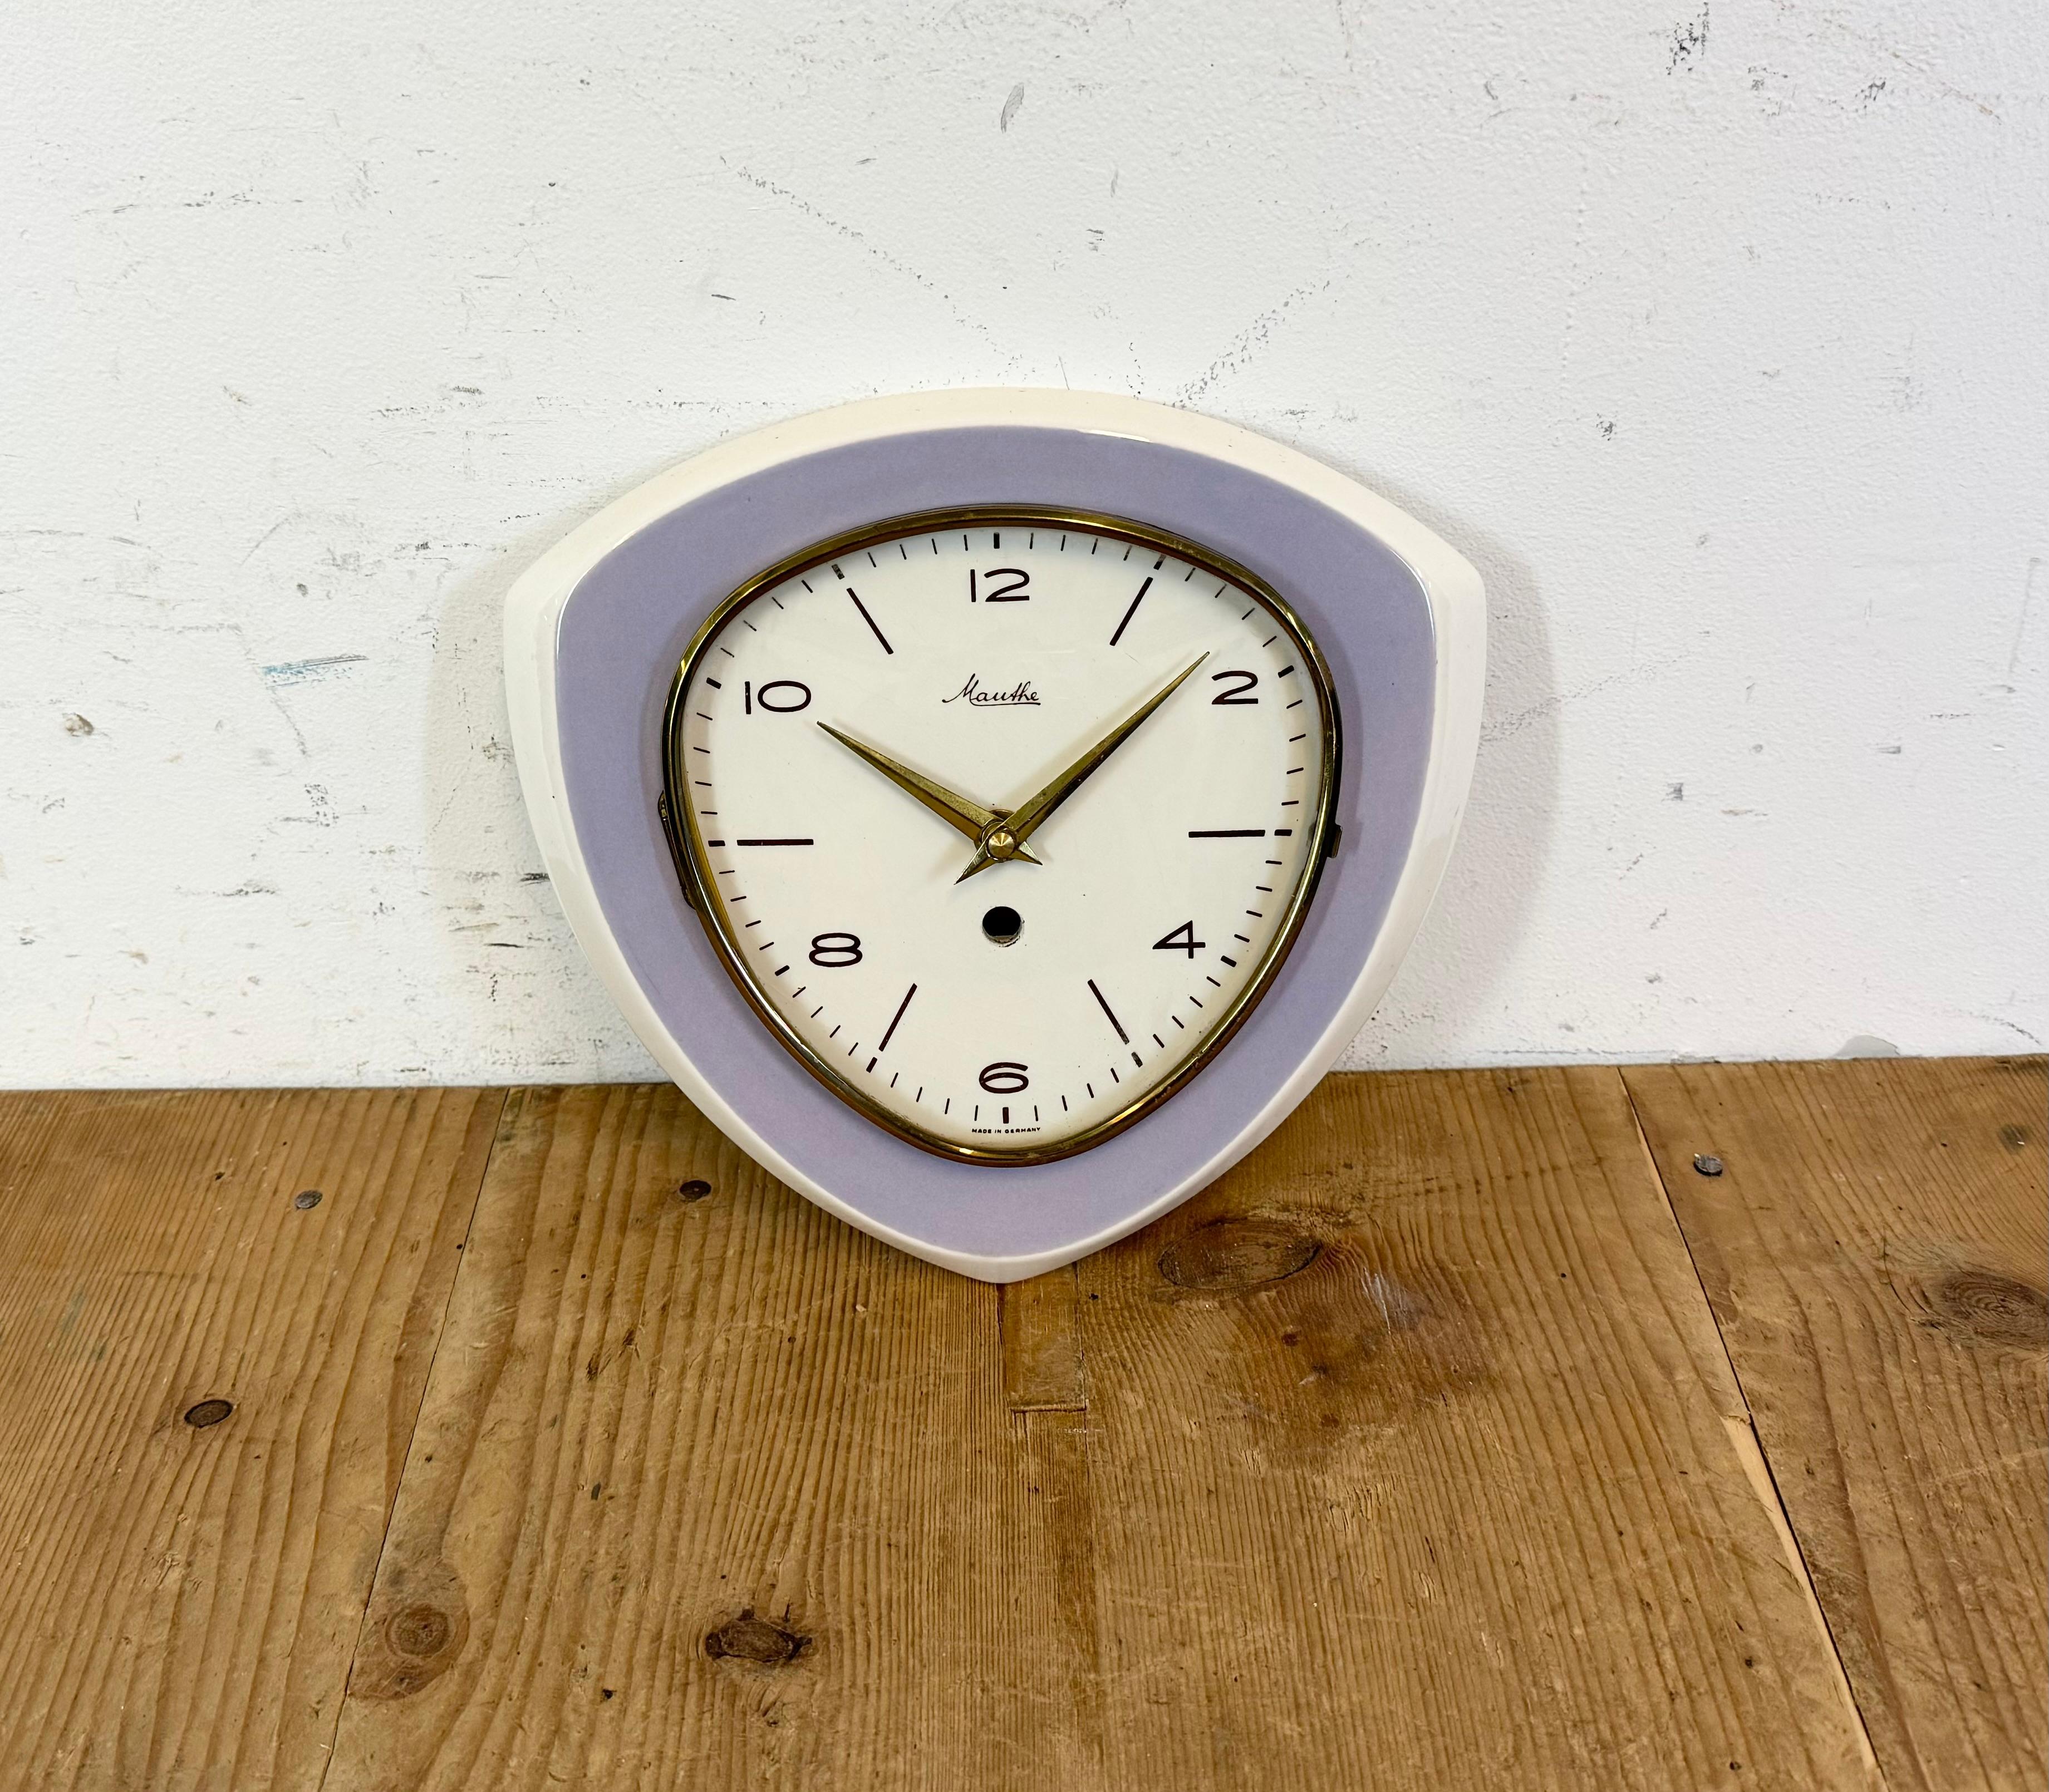 Vintage triangle wall clock was made by Mauthe in Germany during the 1970s .. It features a white and purple porcelain body and a convex clear glass cover with brass ring. The former winding clock has been converted into a battery-powered clockwork